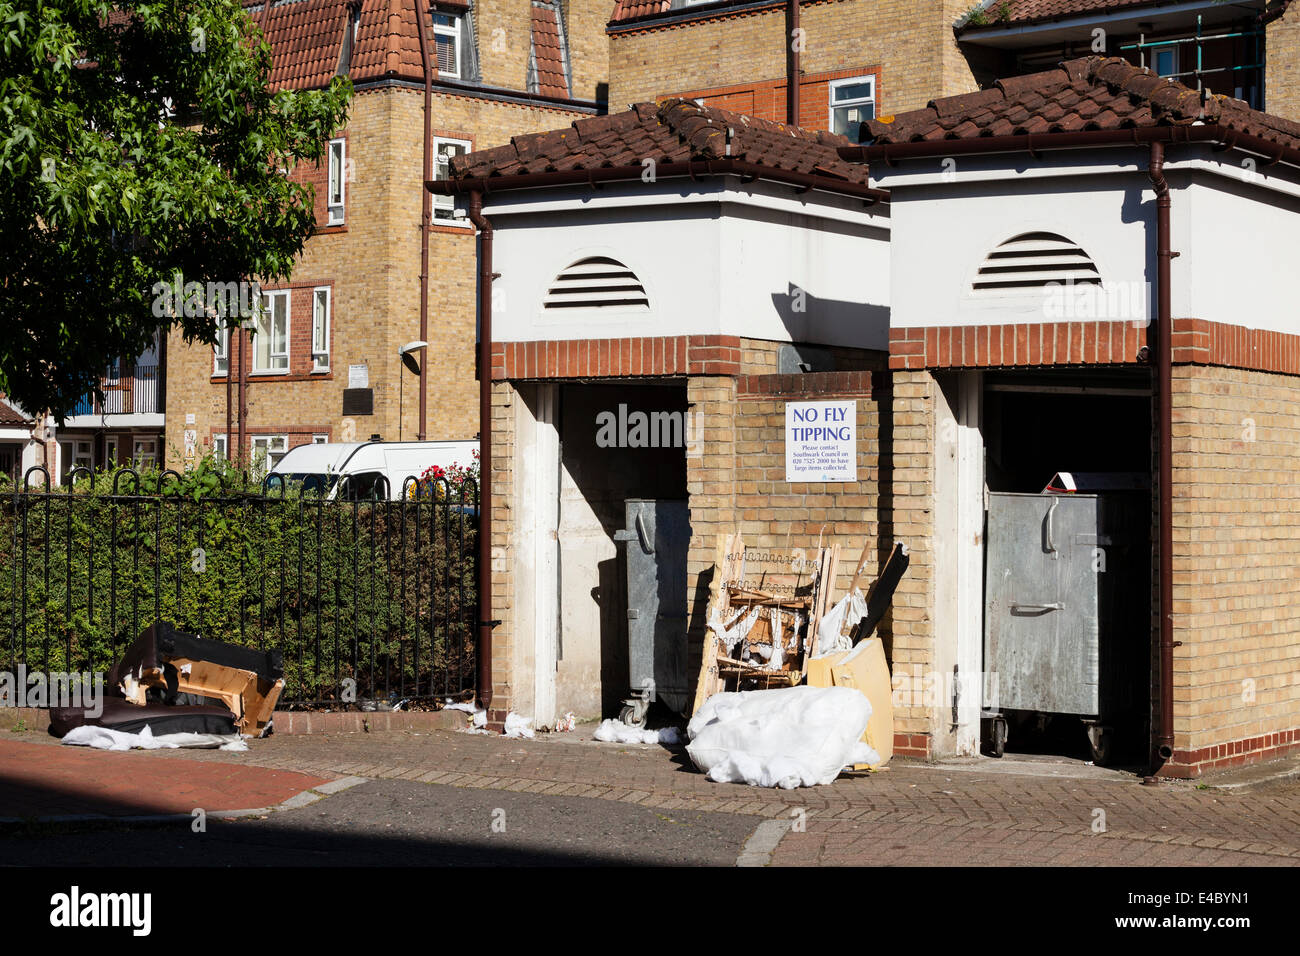 Illegally Dumped Rubbish Left Below A No Fly Tipping Sign, Rotherhithe, London, England Stock Photo